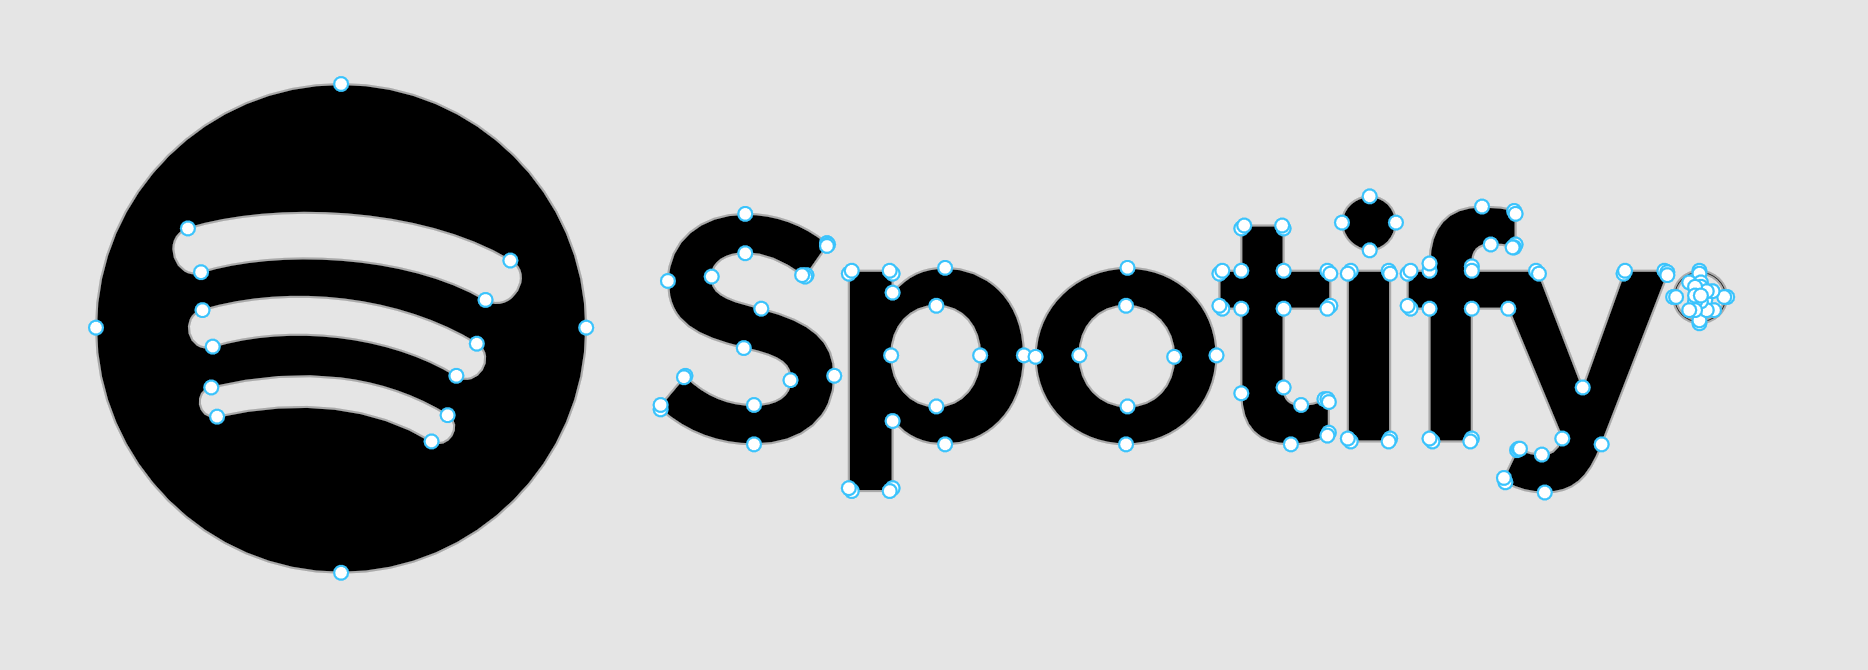 Spotify SVG logo showing its arcs and points